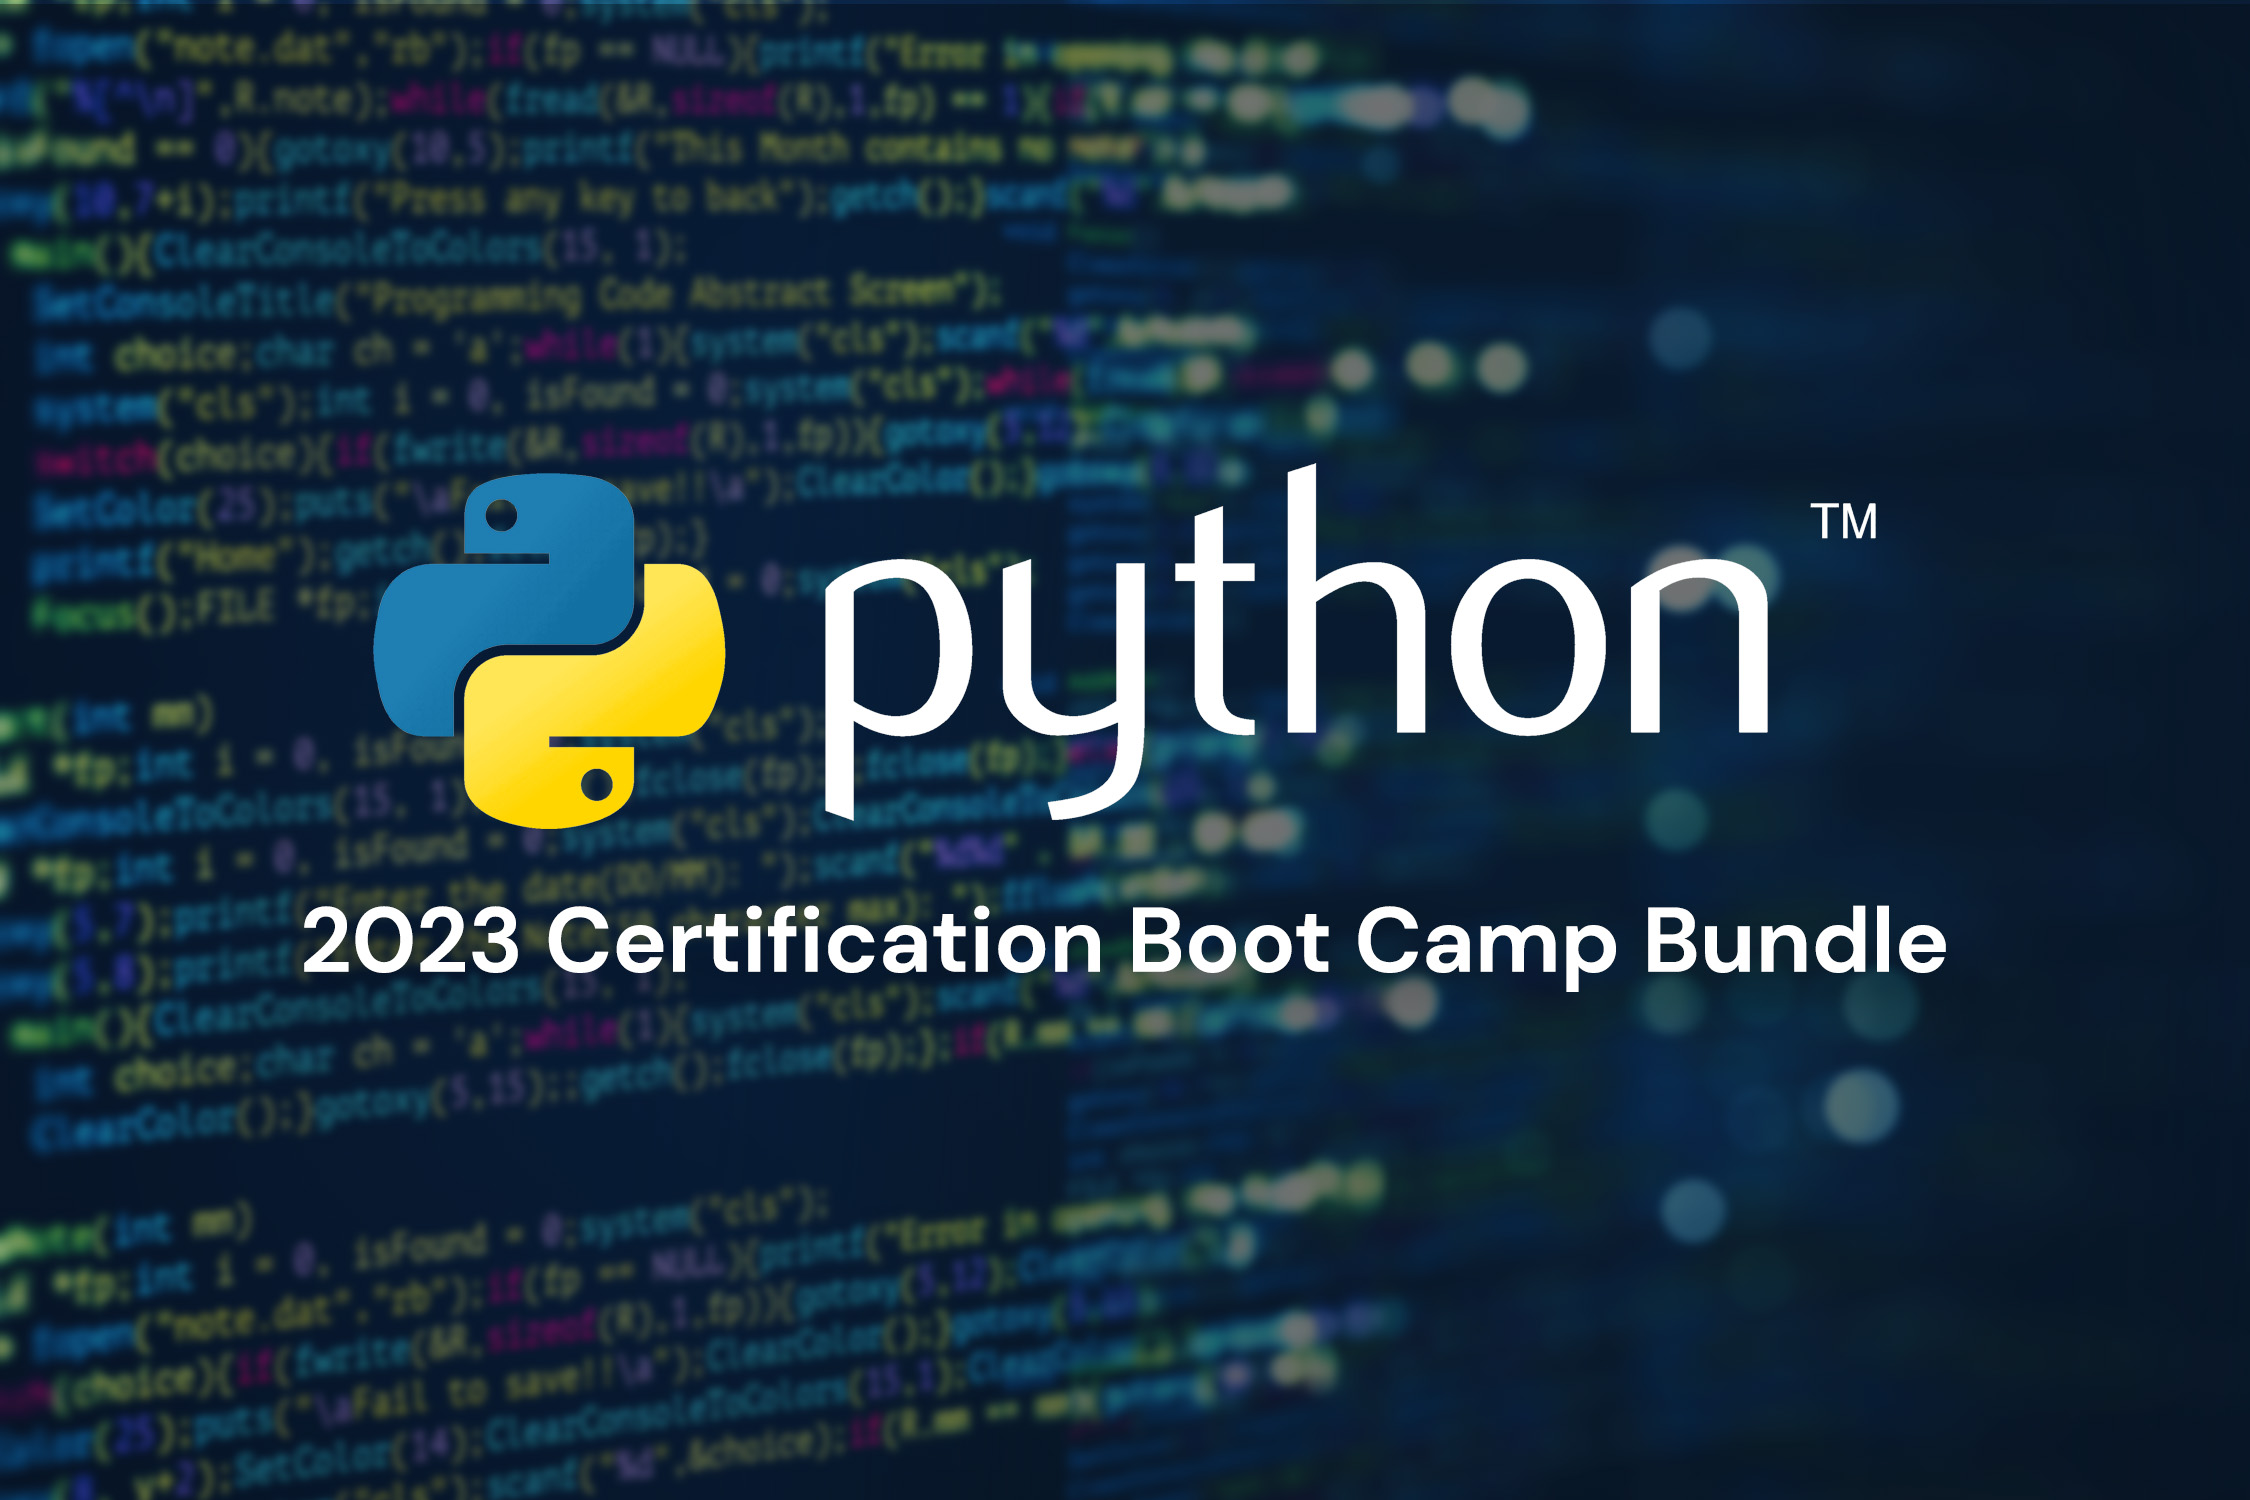 Save $64 on this Python Certification Bundle and make your coding dreams come true